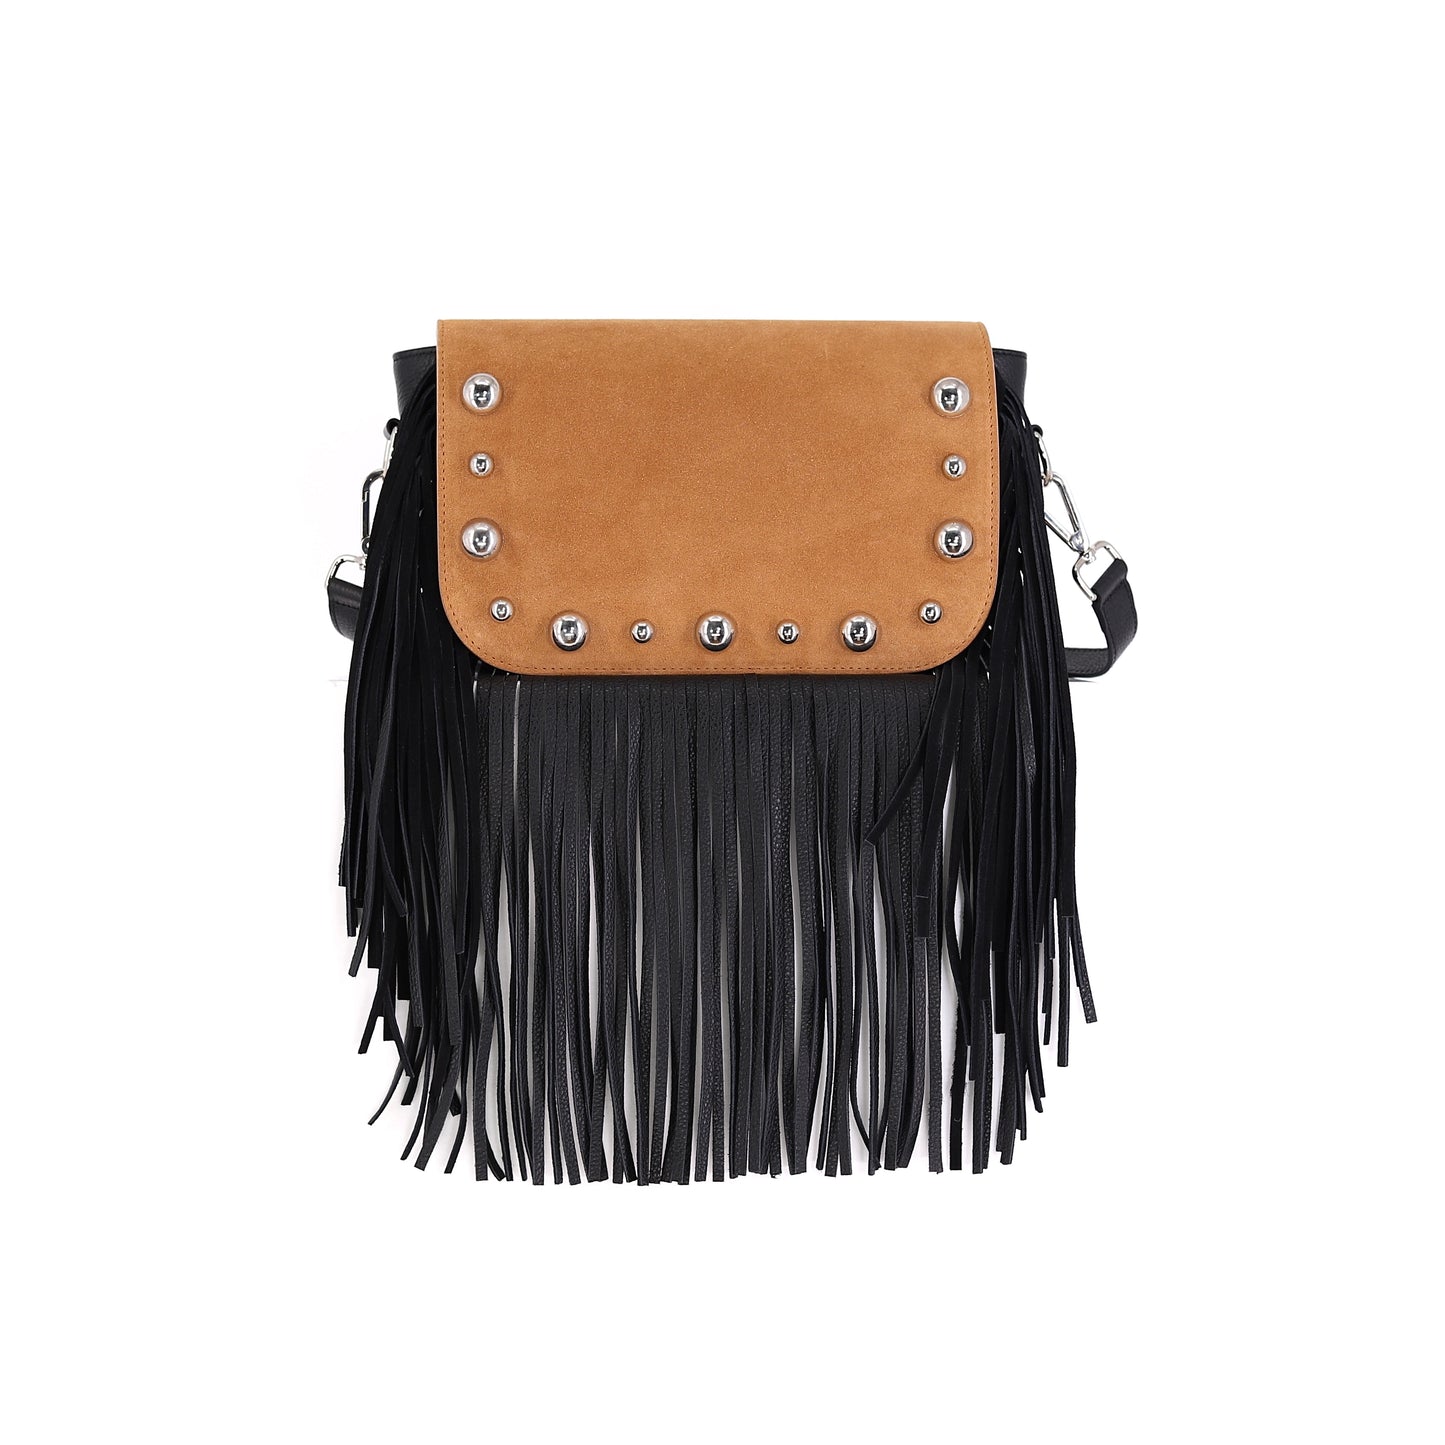 BRONX flap suede leather caramel with studs small